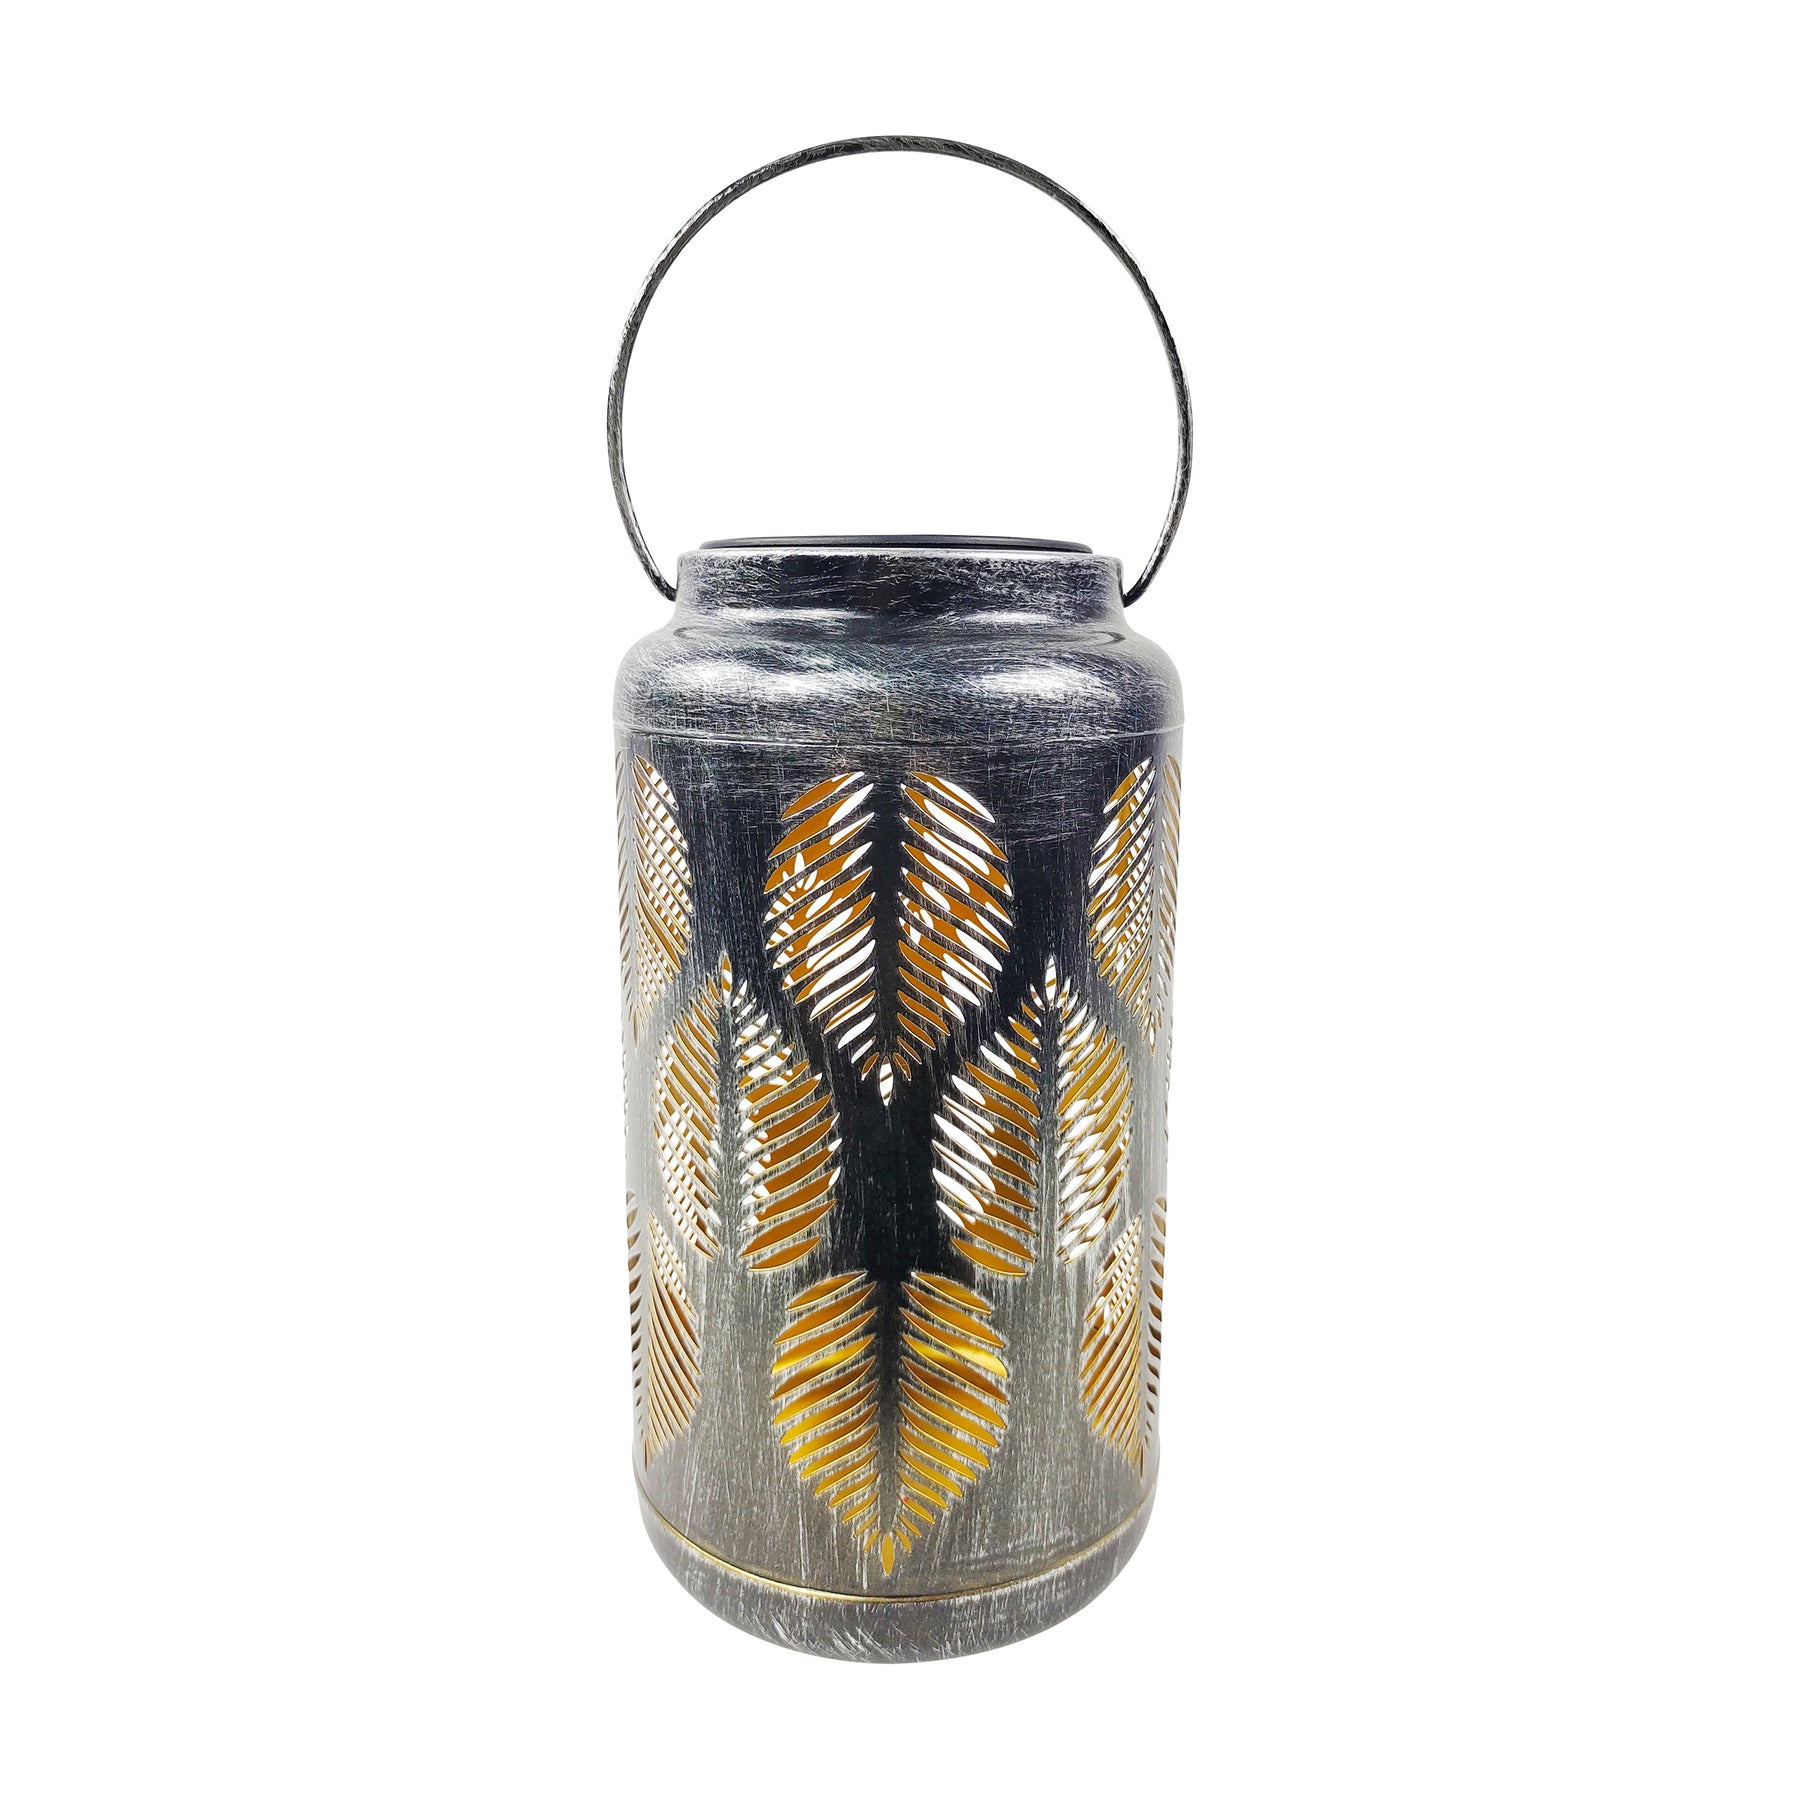 A single Bliss Outdoors 9-inch Tall Decorative LED Lantern with tropical leaf design in the brushed silver variation.